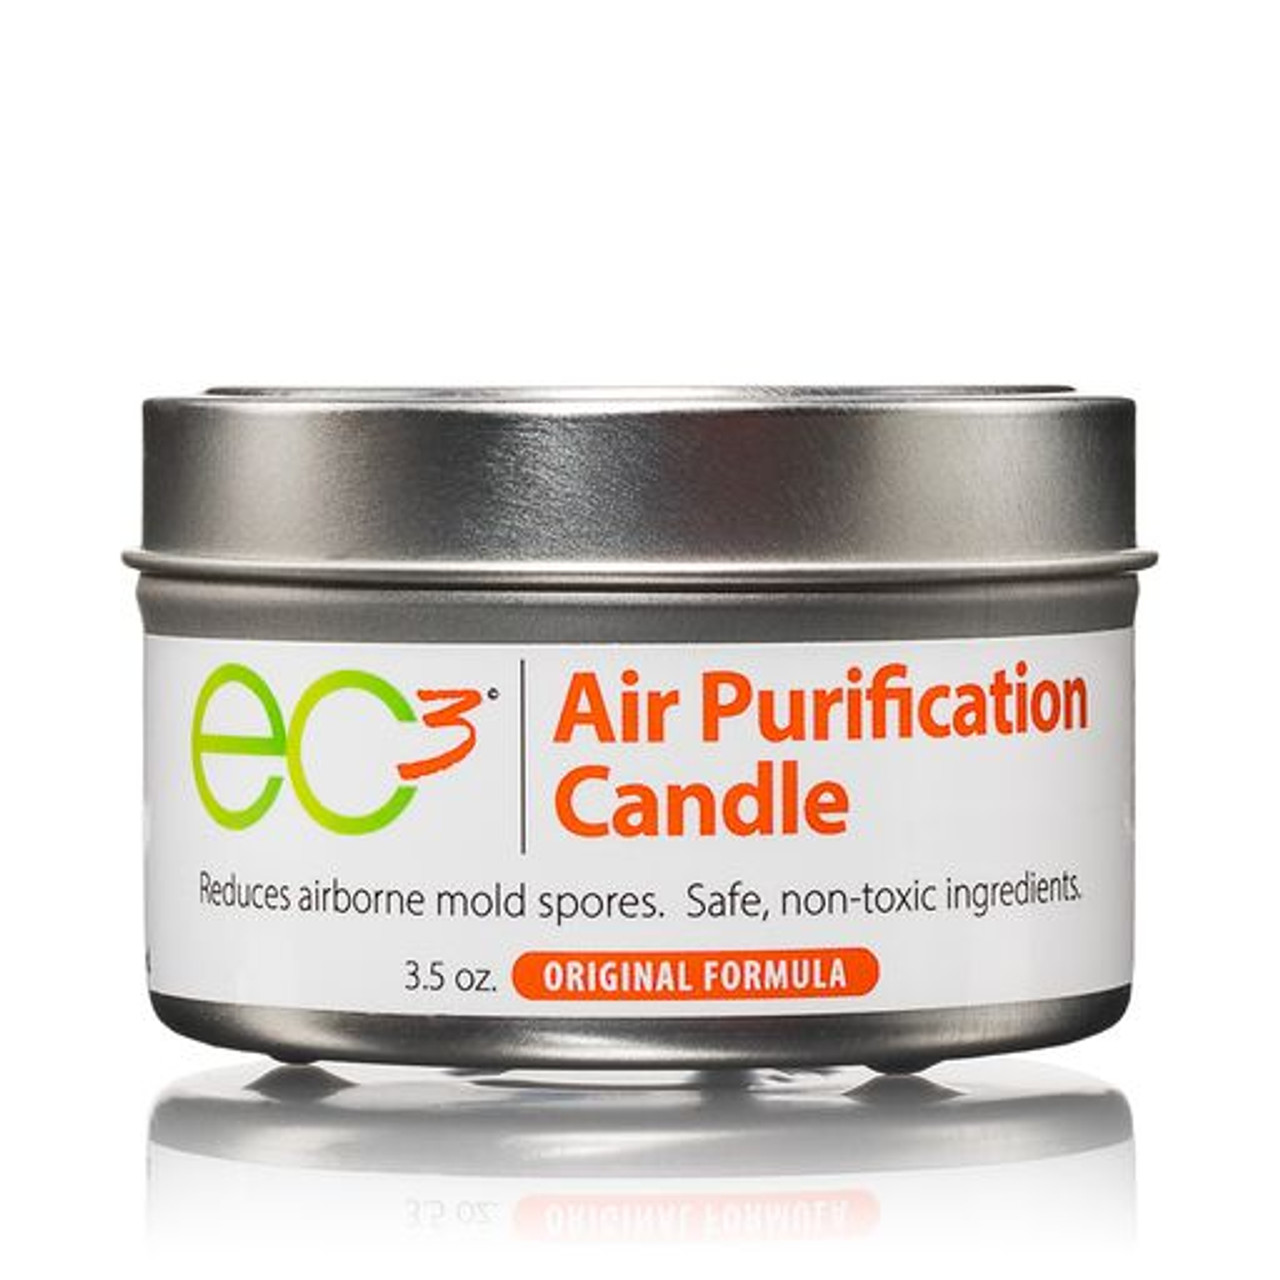 EC3 AIR PURIFICATION Candle - Reduces Levels of Mold Spores in Your Home  £14.20 - PicClick UK